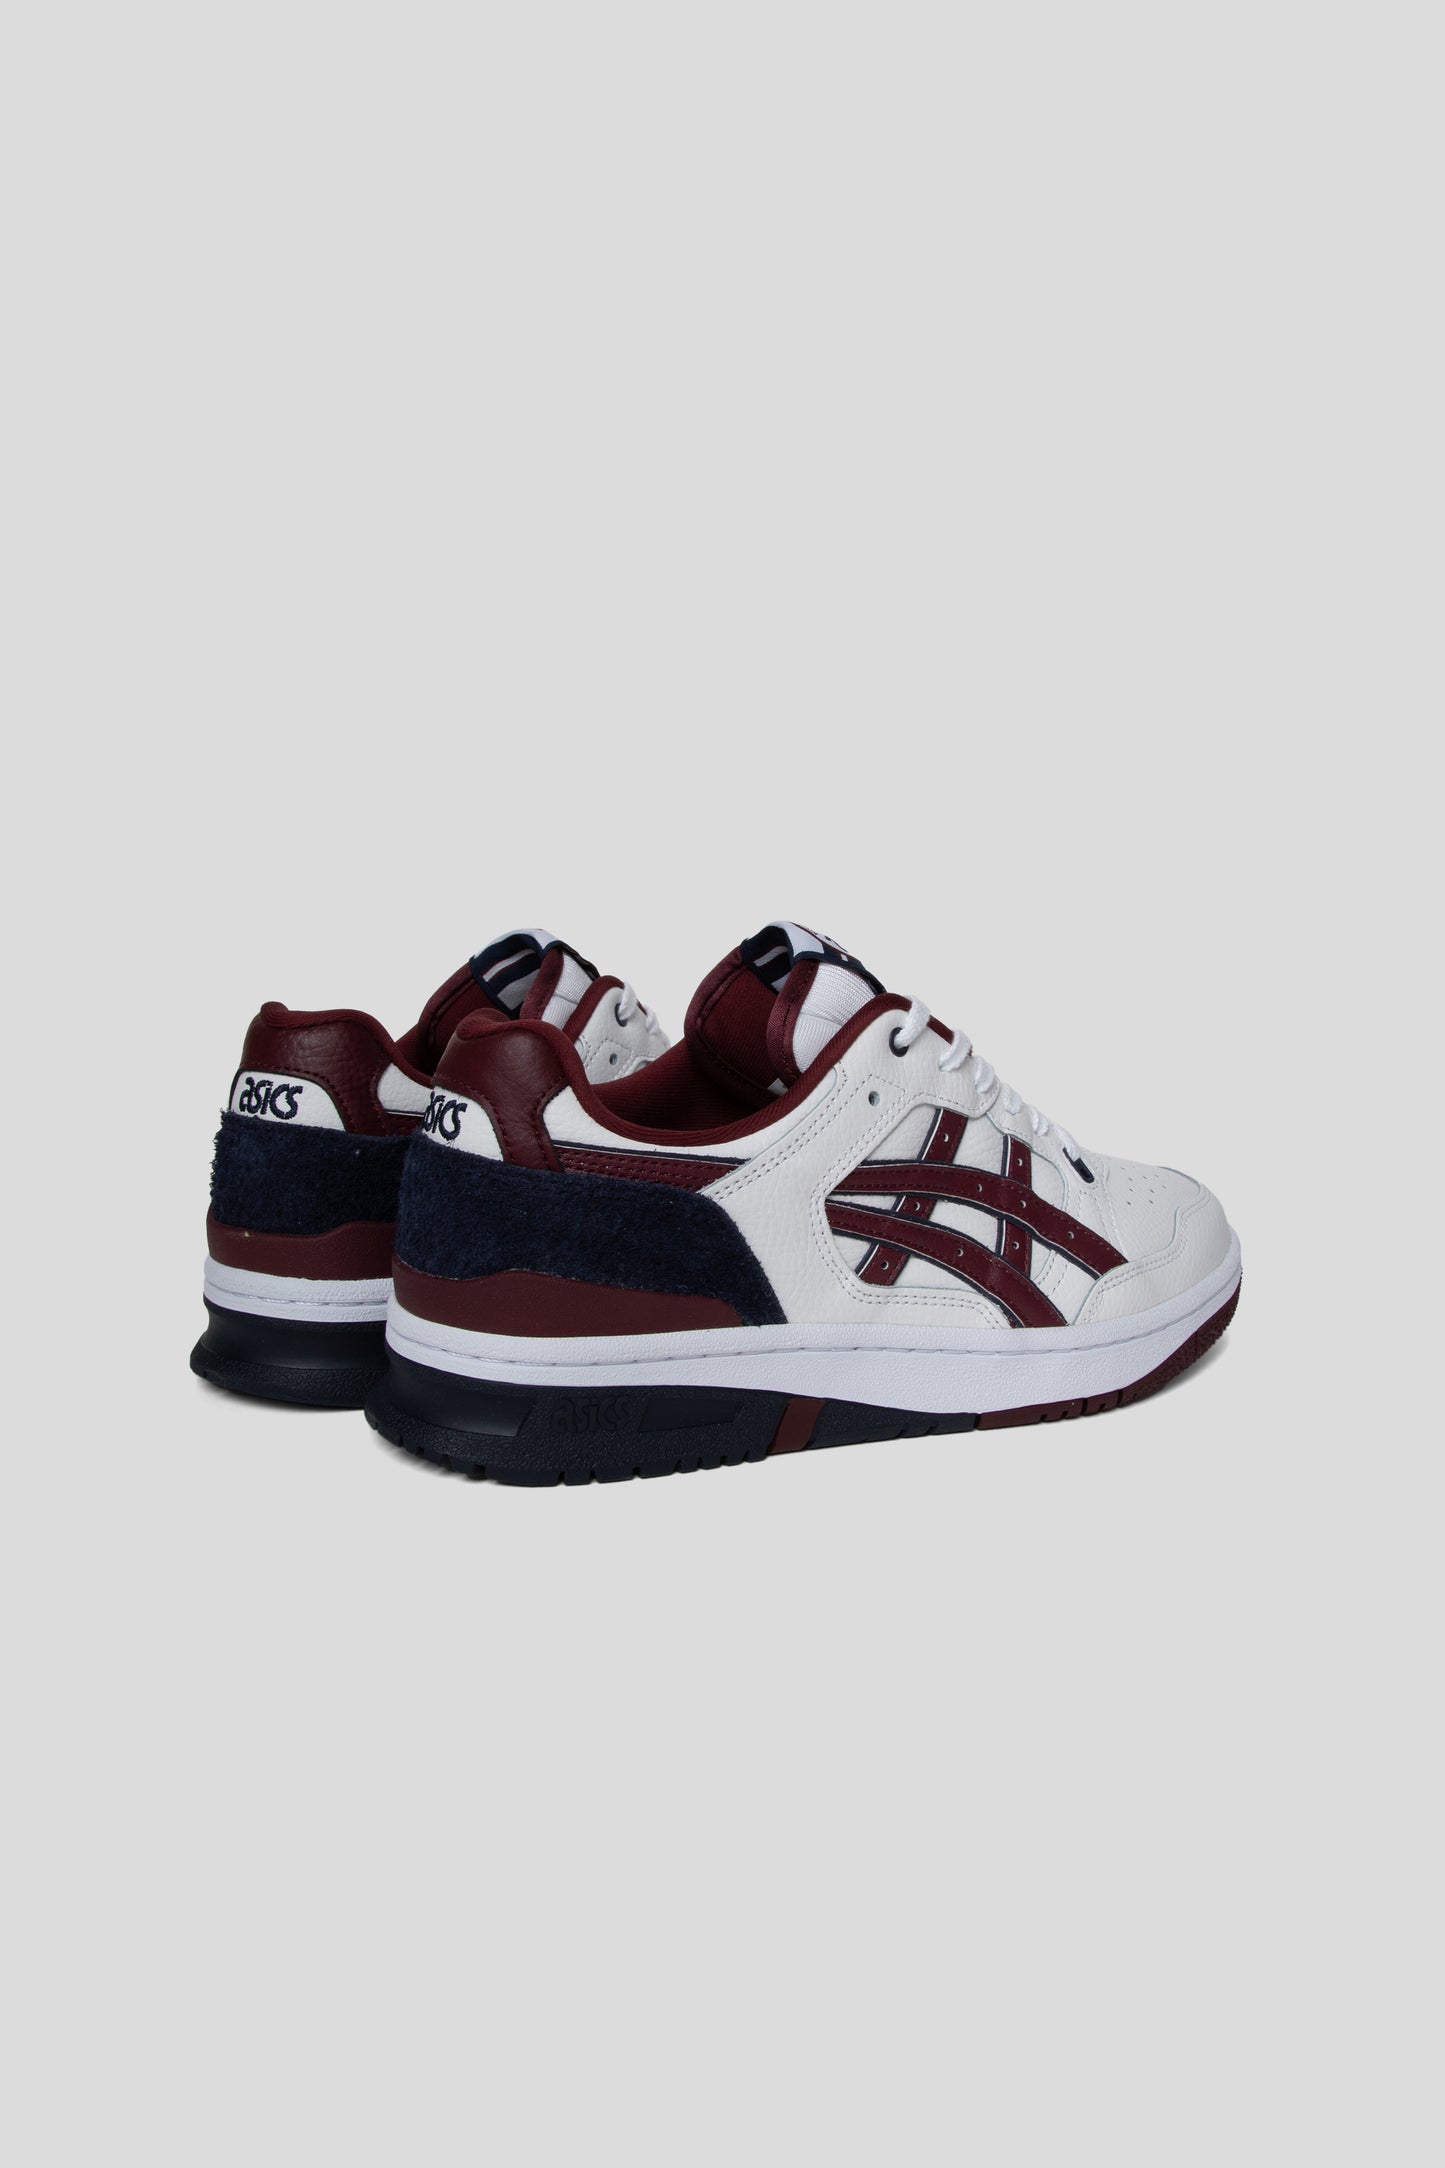 Asics EX89 Shoe in White and Port Royal